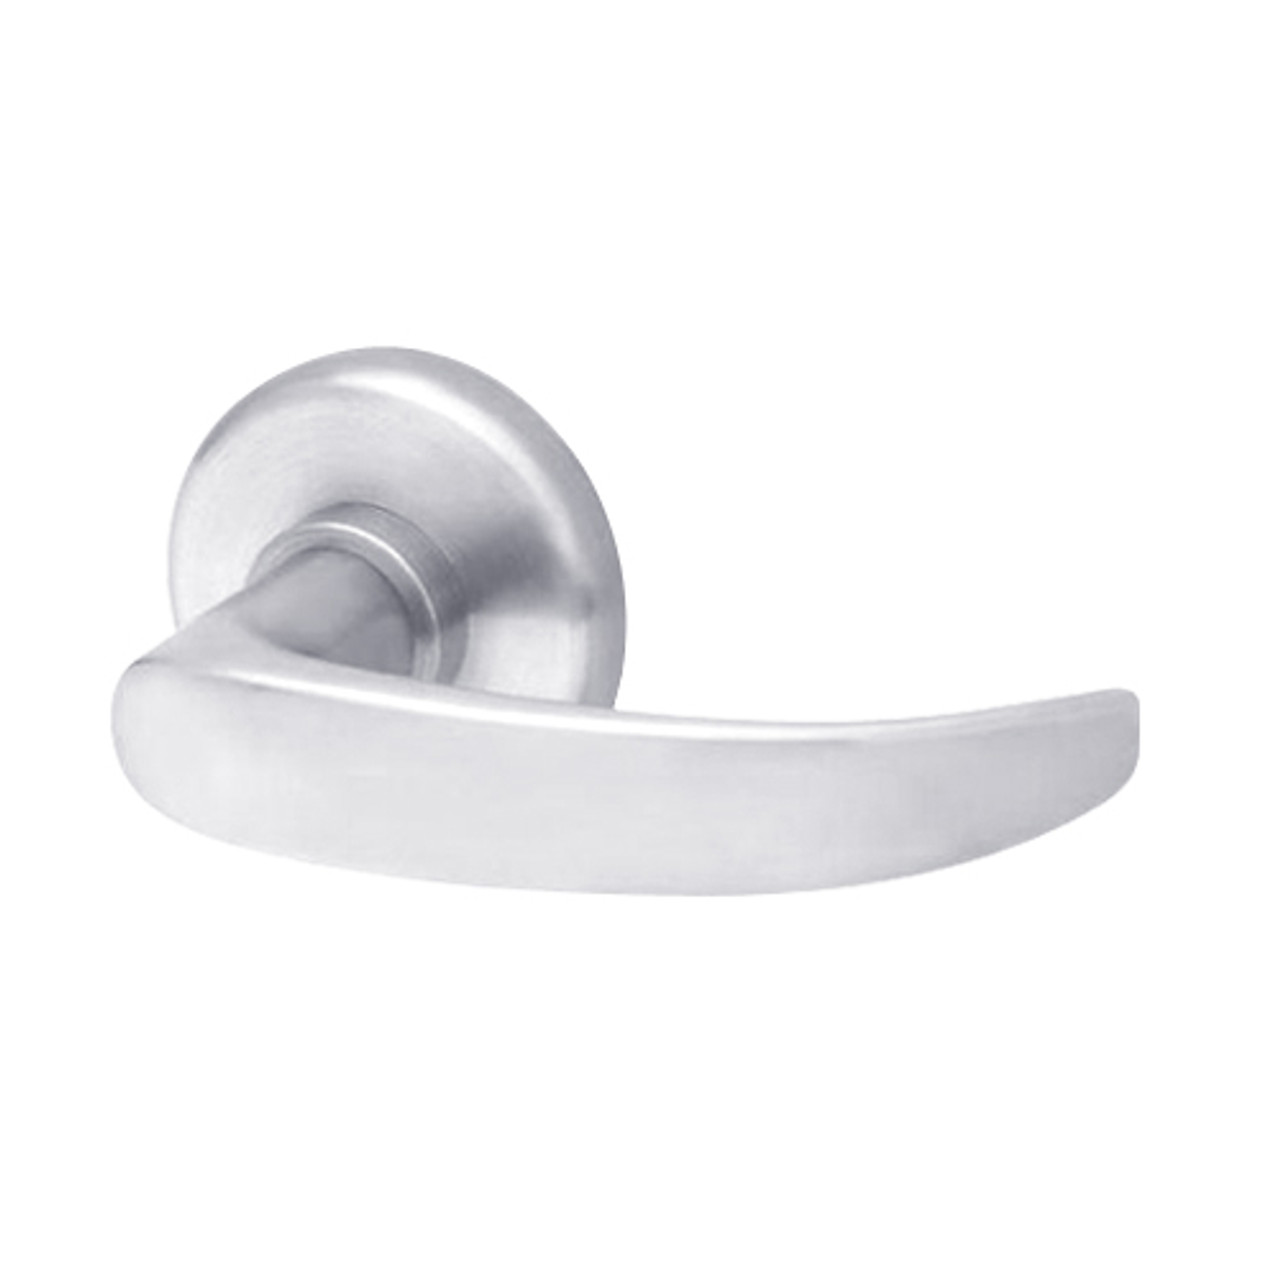 40HTKIS214R625 Best 40H Series Trim Kits Inside Lever w/ turn with Curved Return Style in Bright Chrome